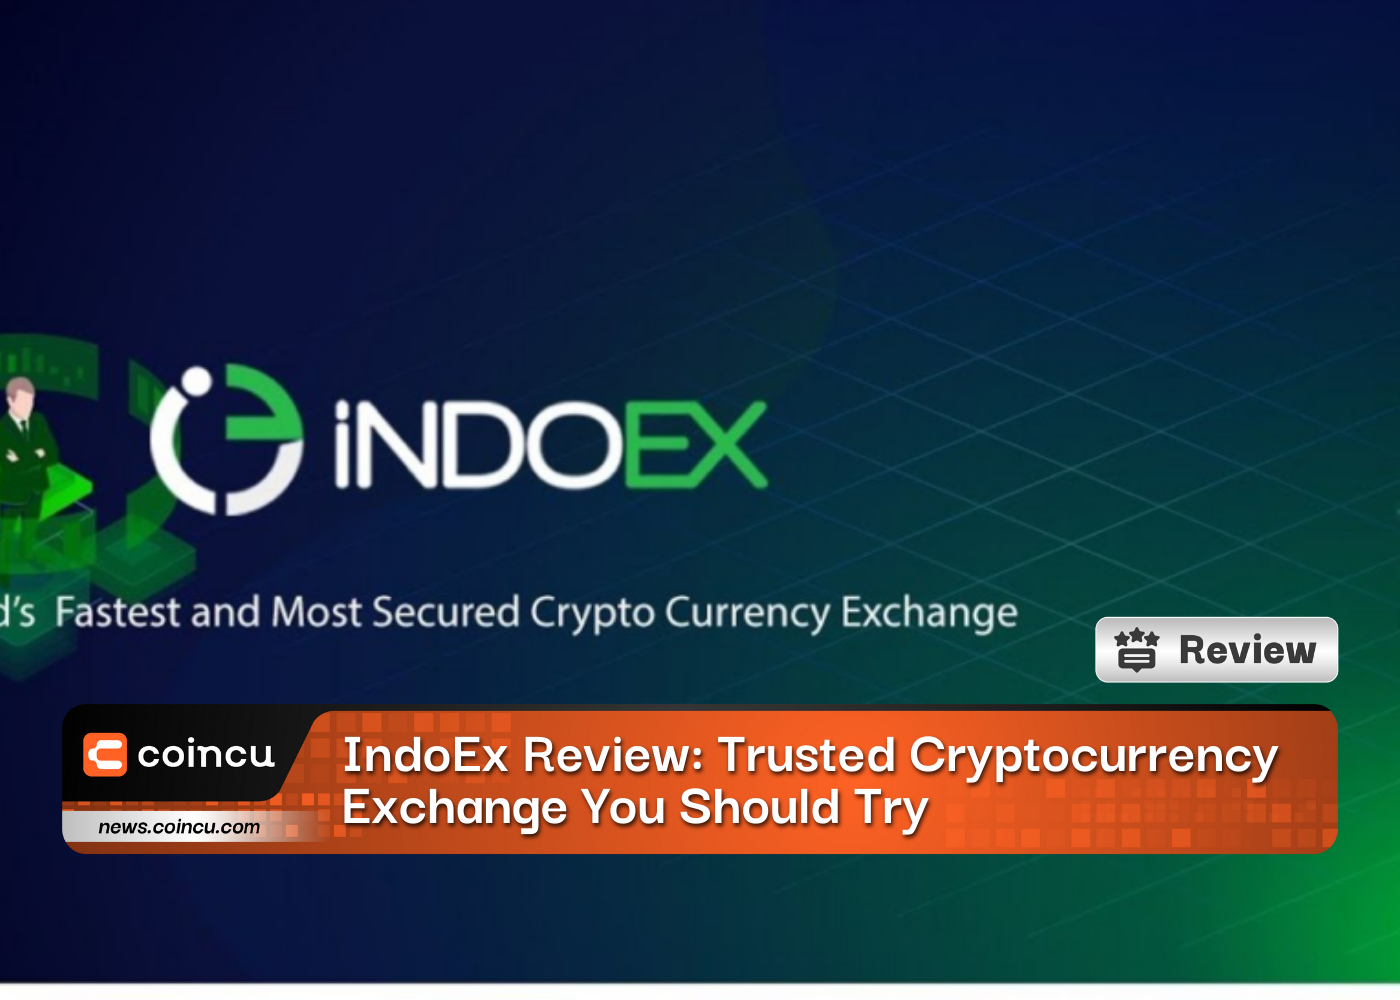 IndoEx Review: Trusted Cryptocurrency Exchange You Should Try